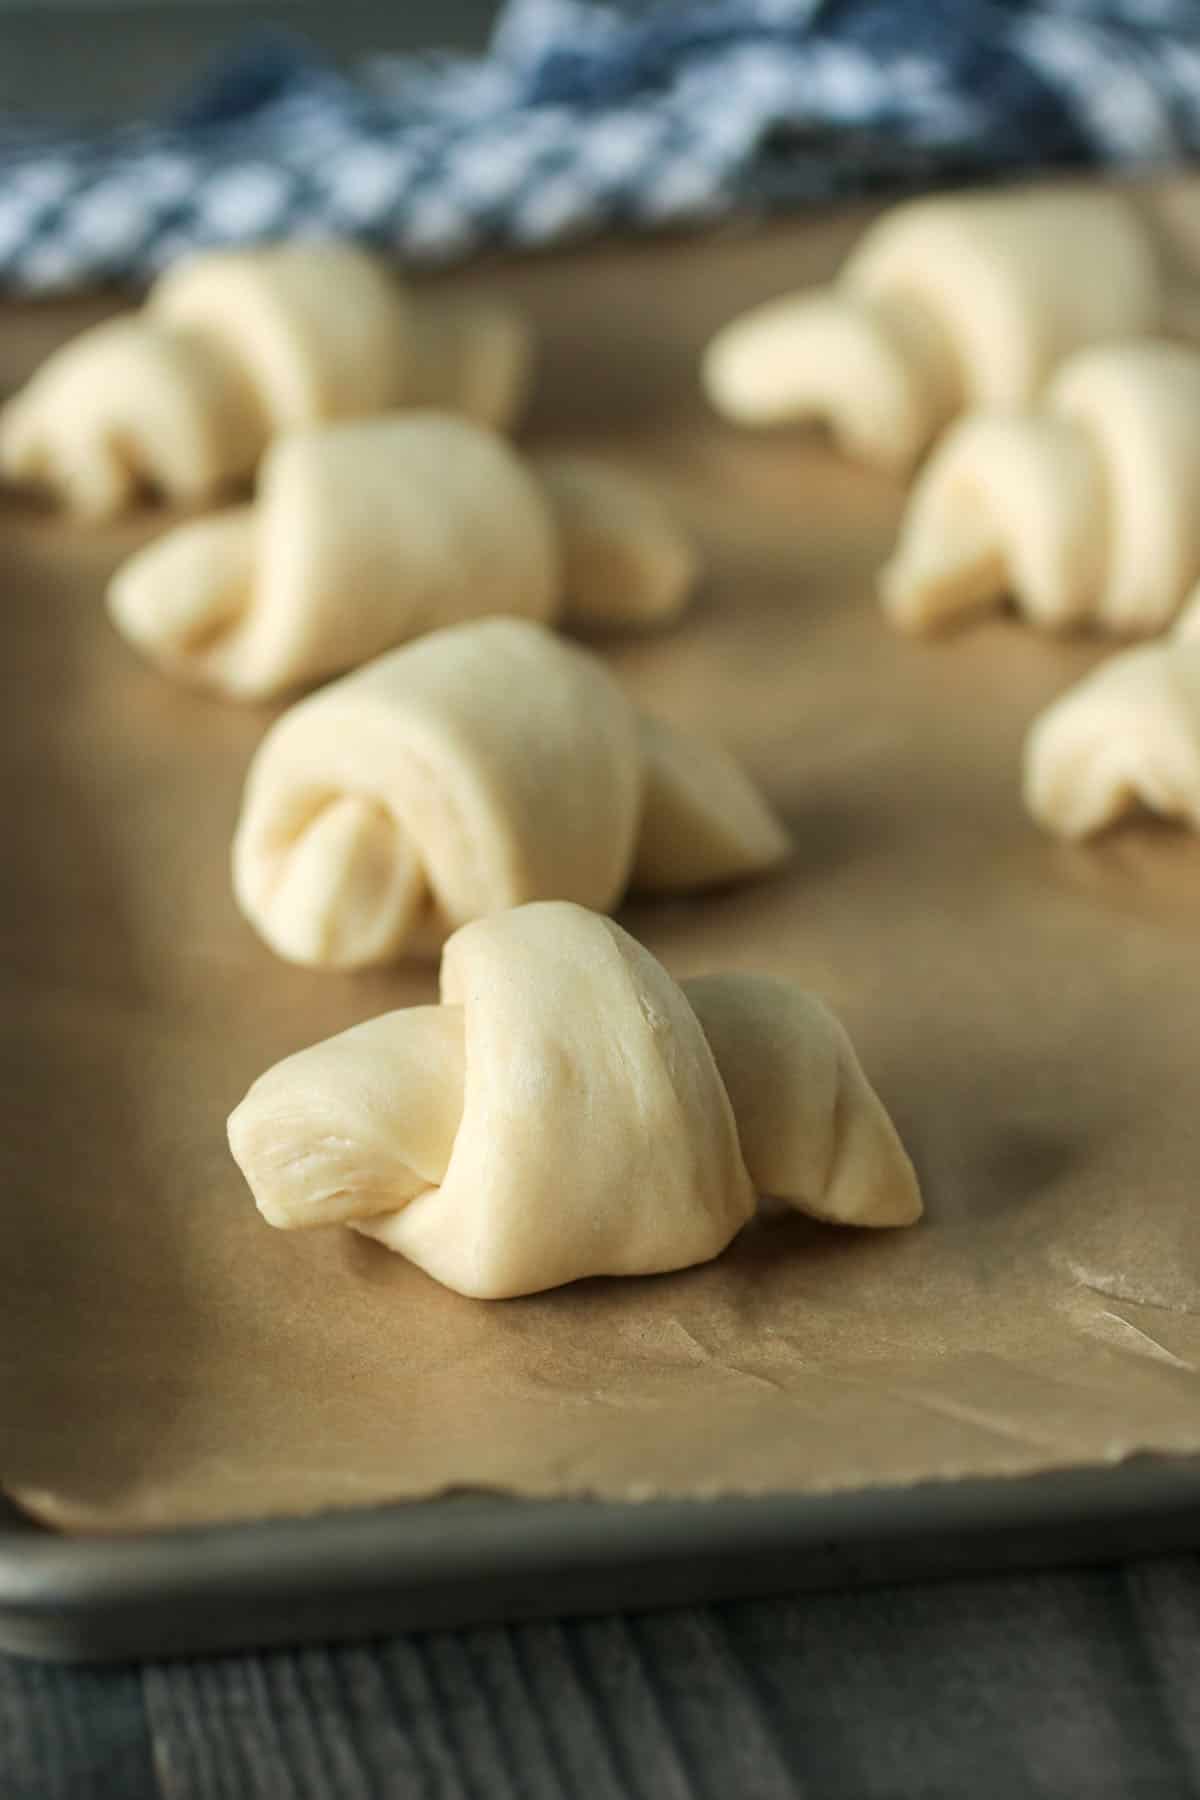 Crescent rolls ready for baking.